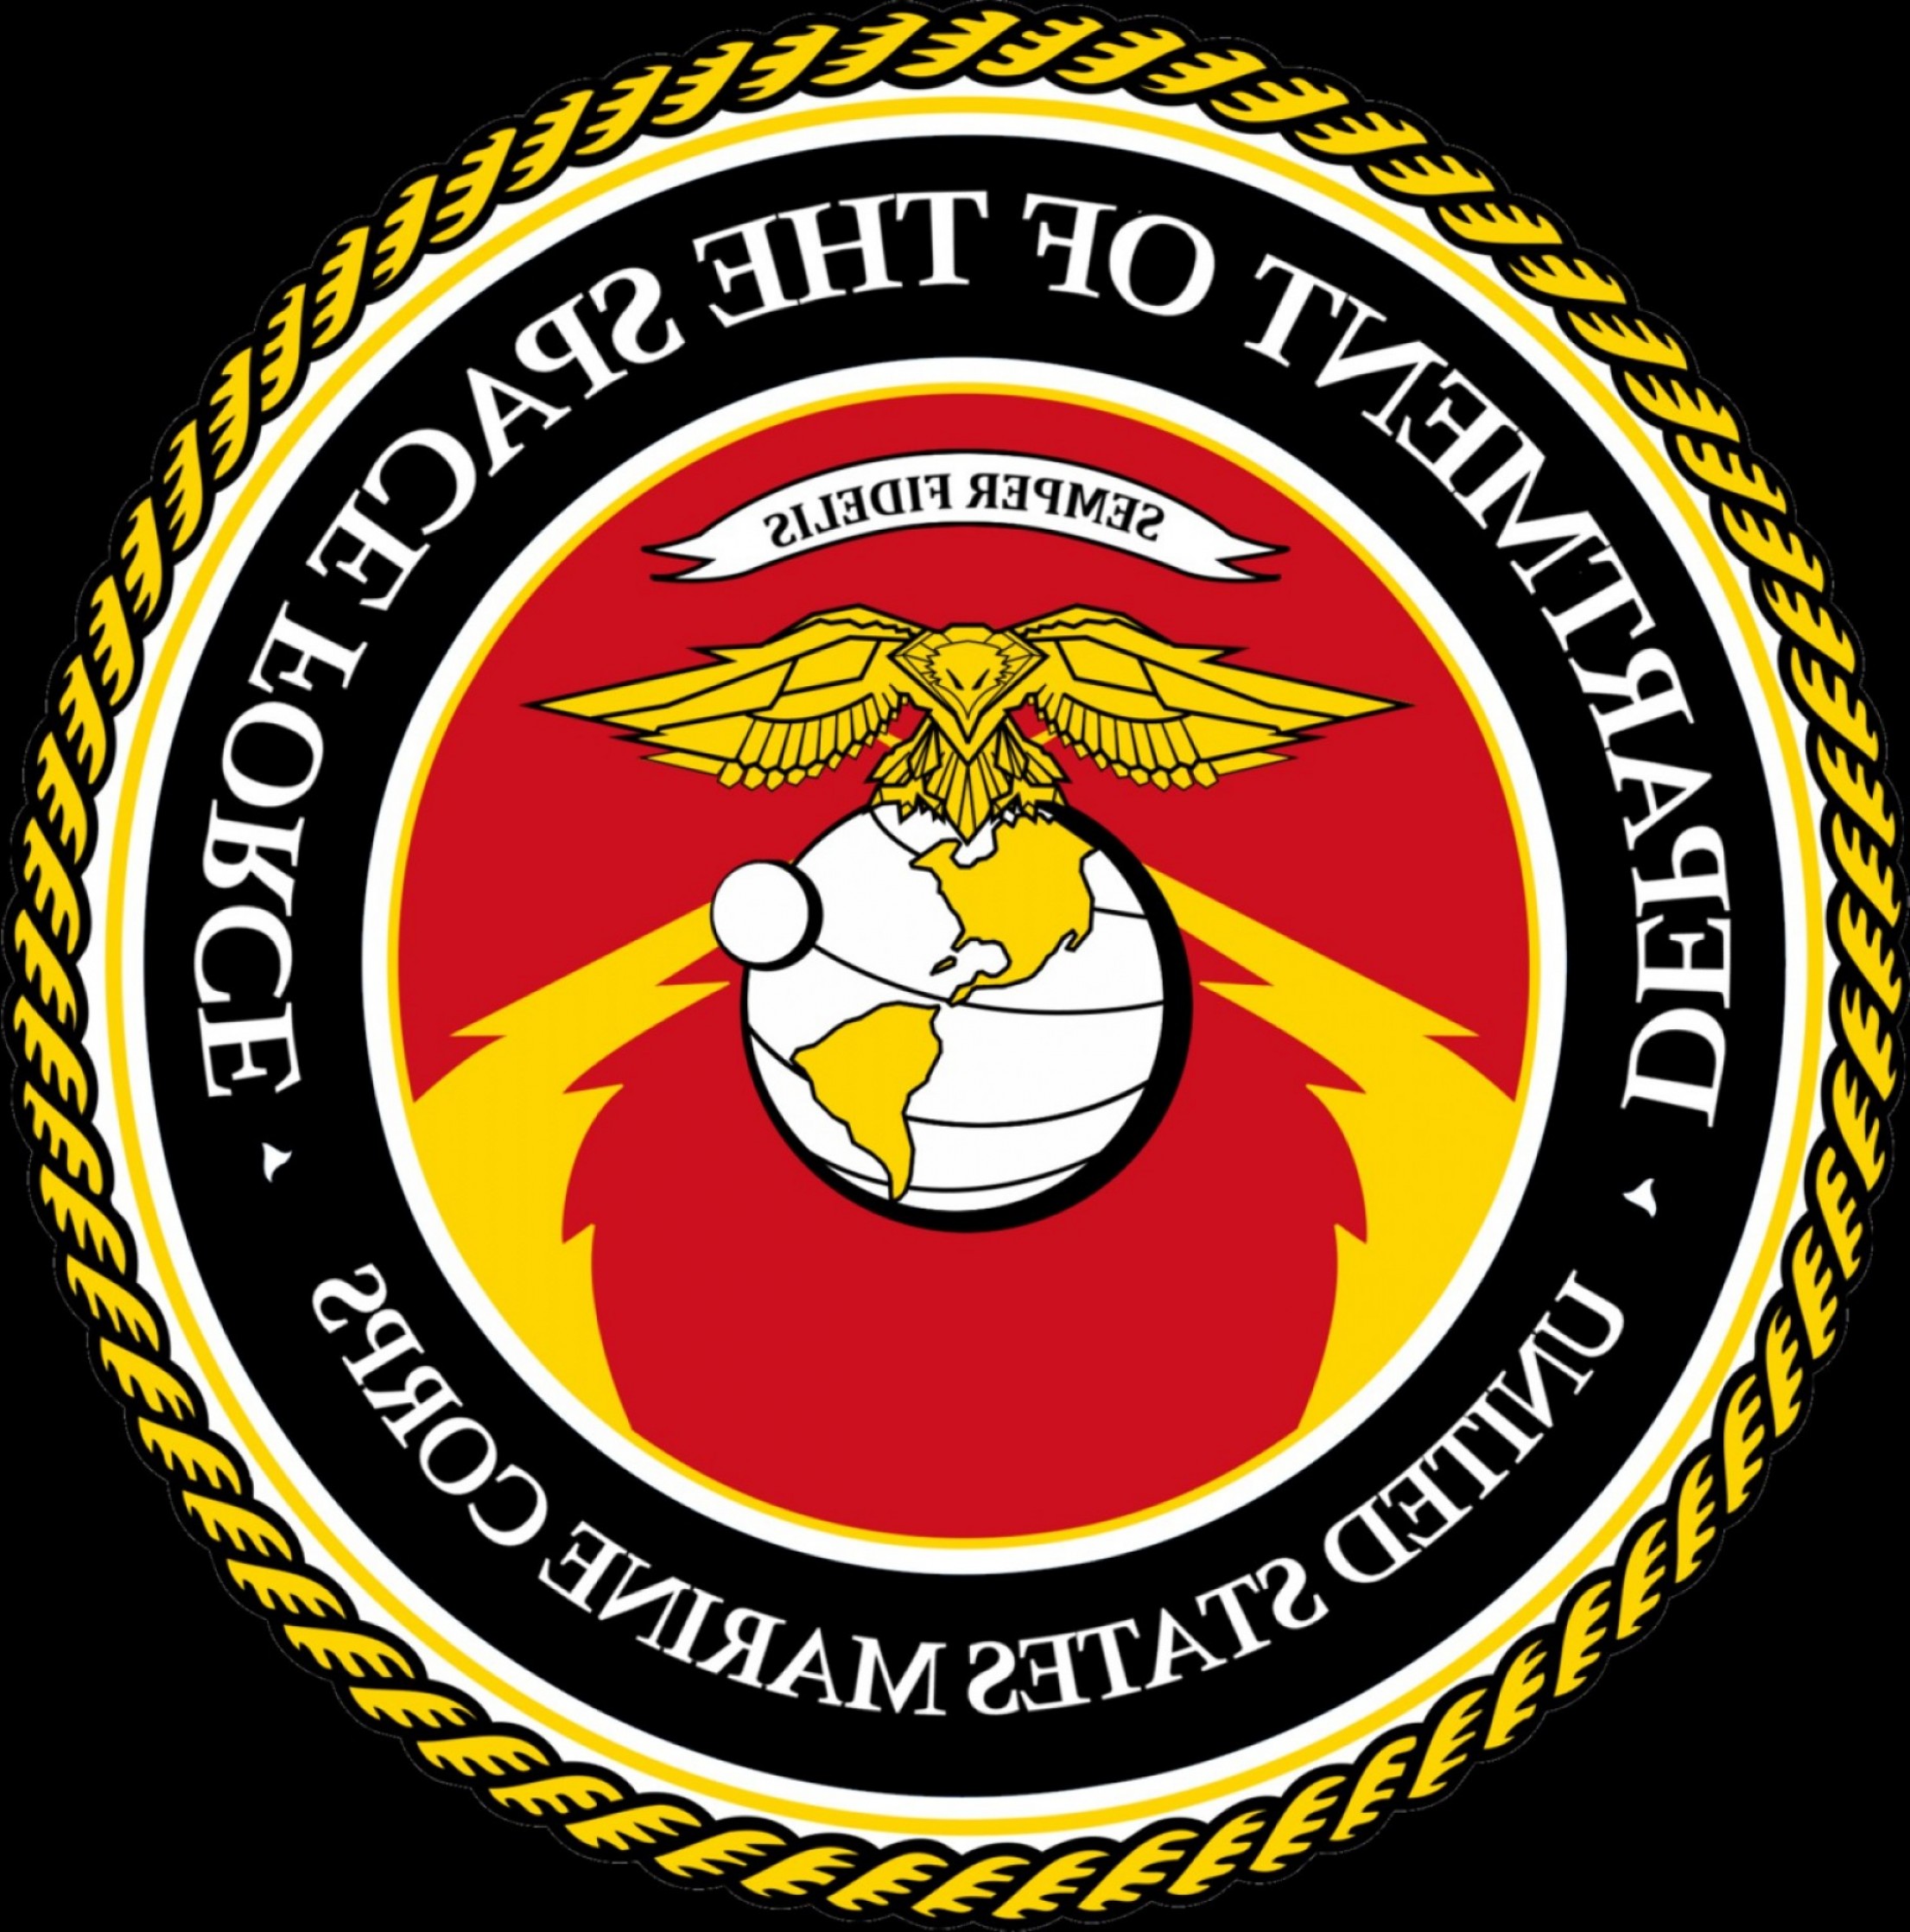 Us Marines Logo Vector at Collection of Us Marines Logo Vector free for